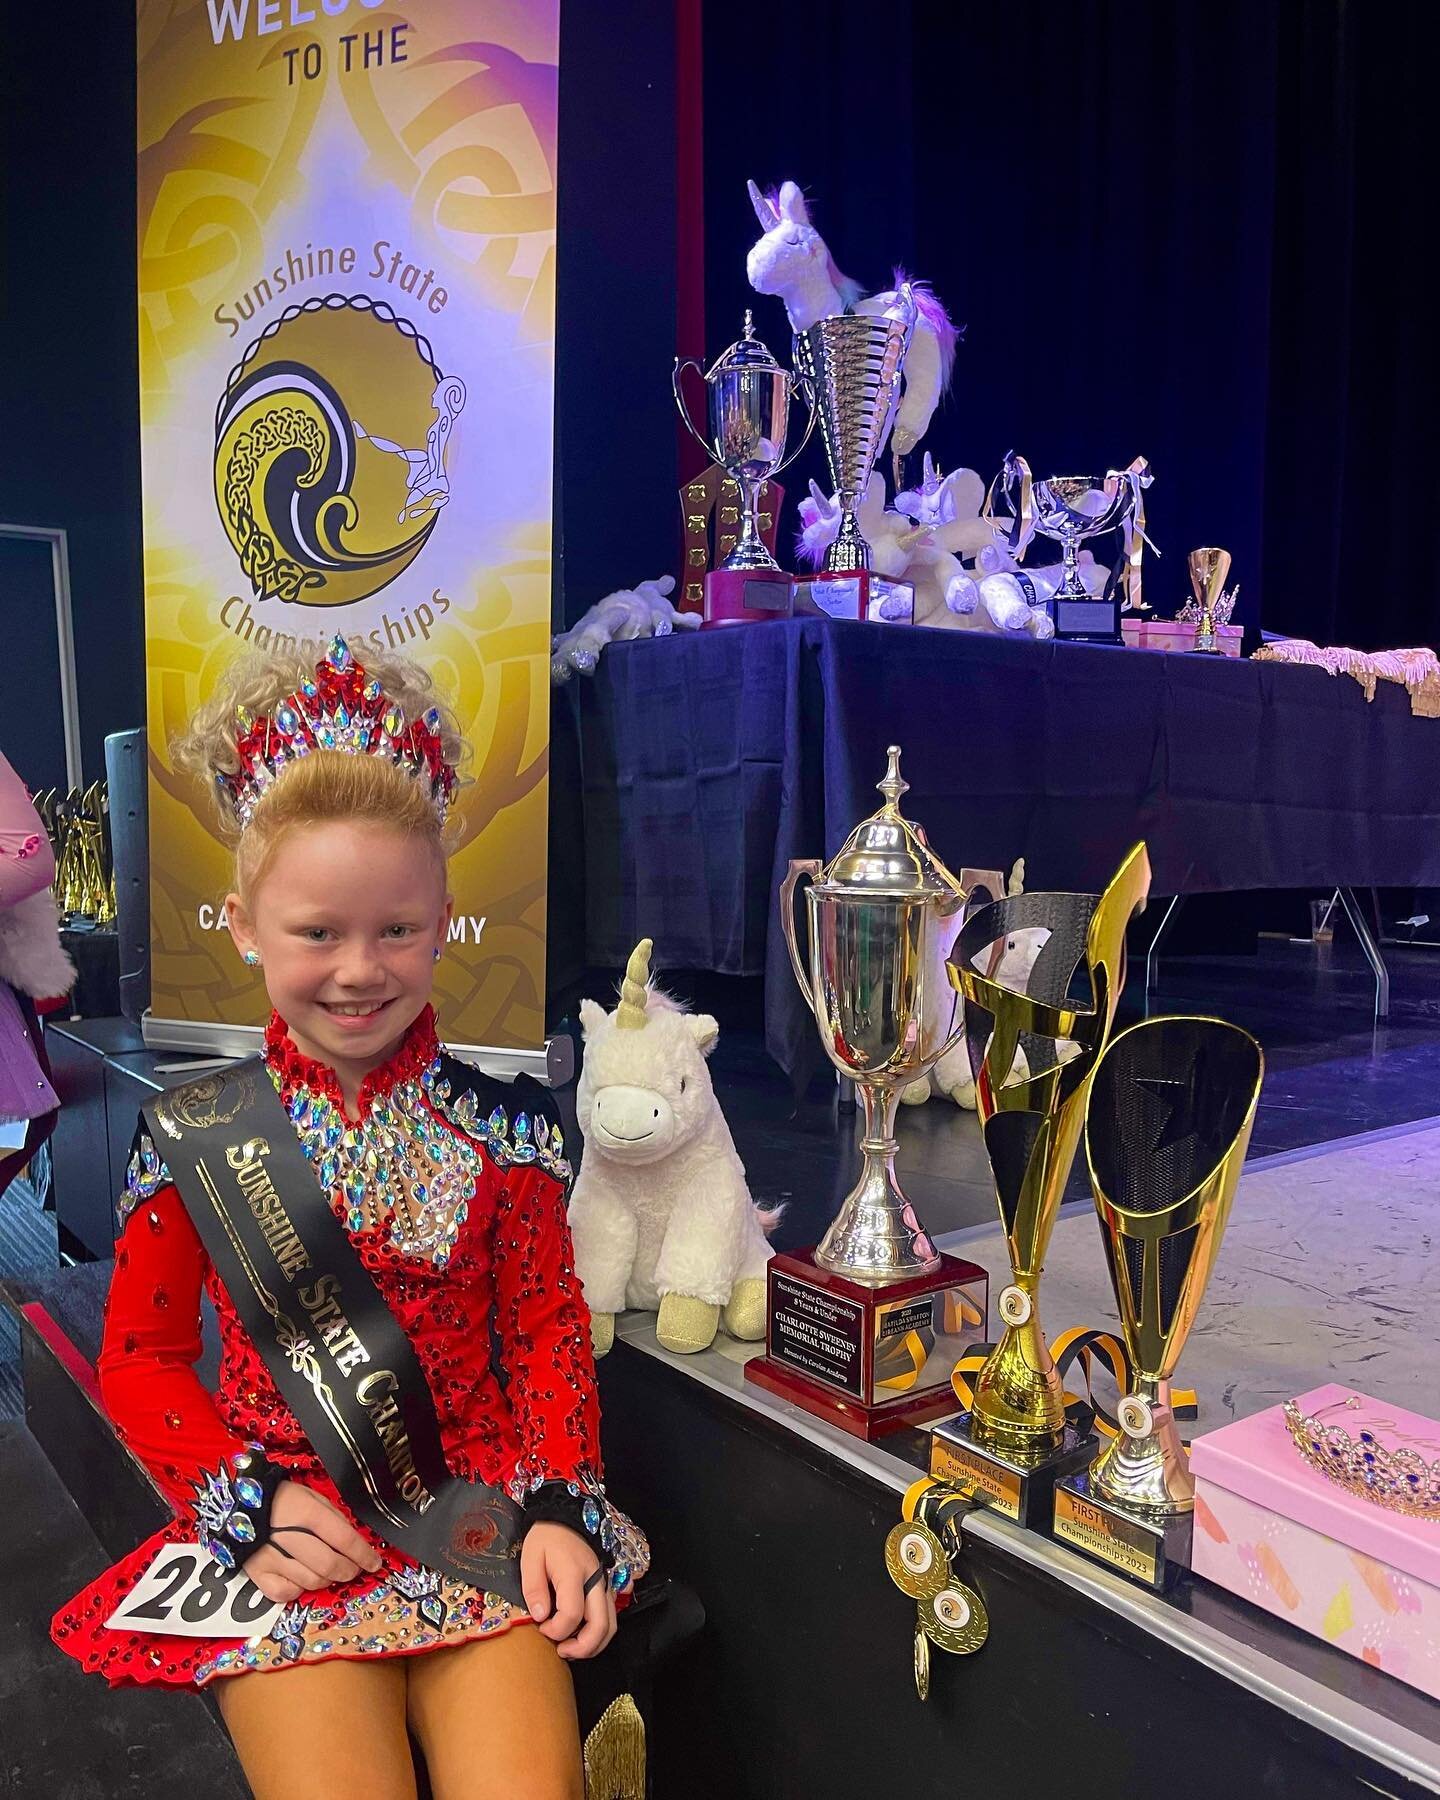 🦊 AUDREY FOX 🦊 
🏆 7 &amp; 8 YEARS SUNSHINE STATE CHAMPION 🏆

Audrey has gone from strength to strength over the last few weeks and months and at the weekend, she managed to win her first ever Open Championship at the 2023 Sunshine State Champions